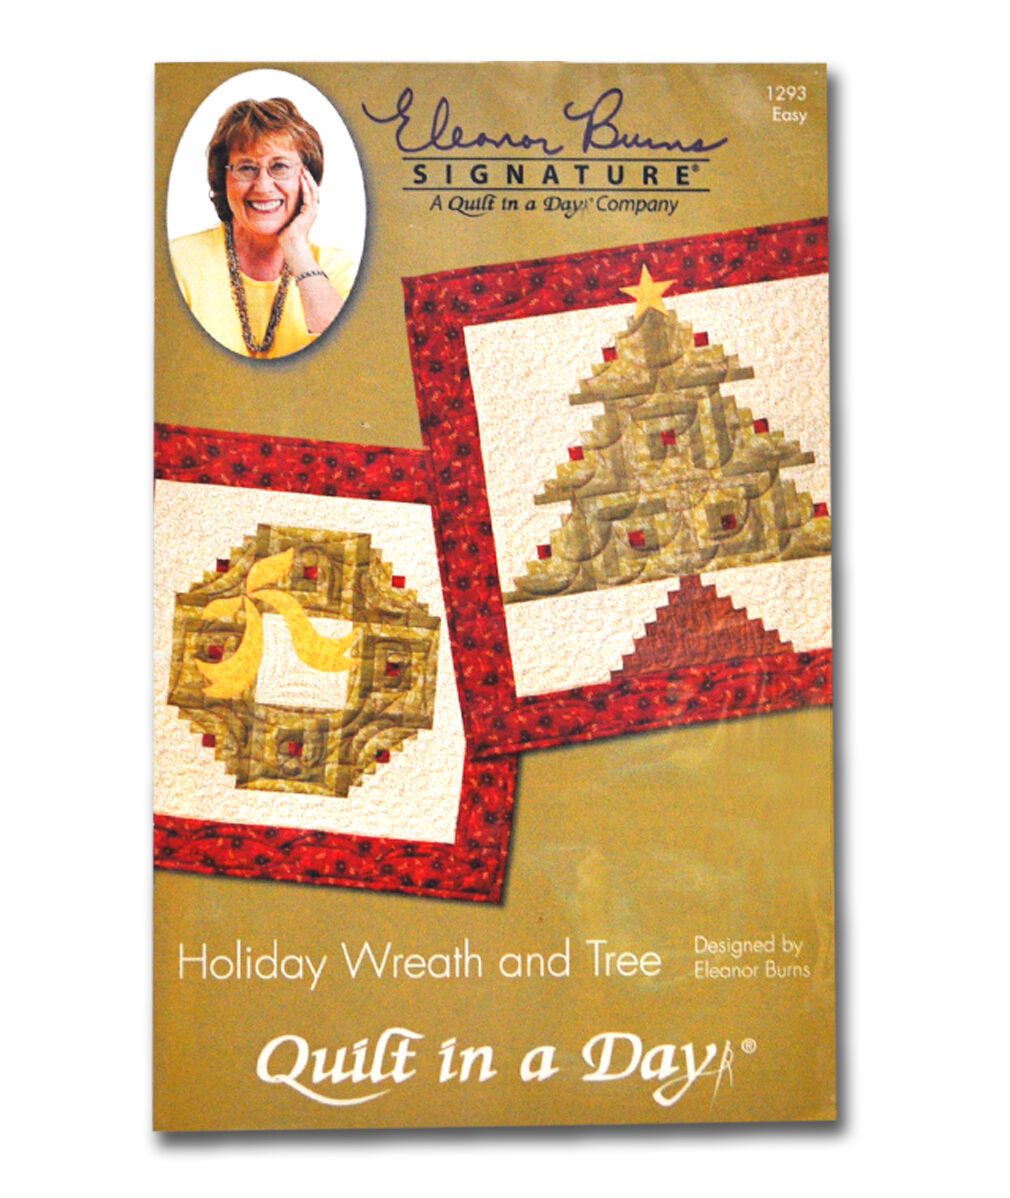 Holiday Wreath and Tree Pattern By Quilt In A Day 1293 - $14.95